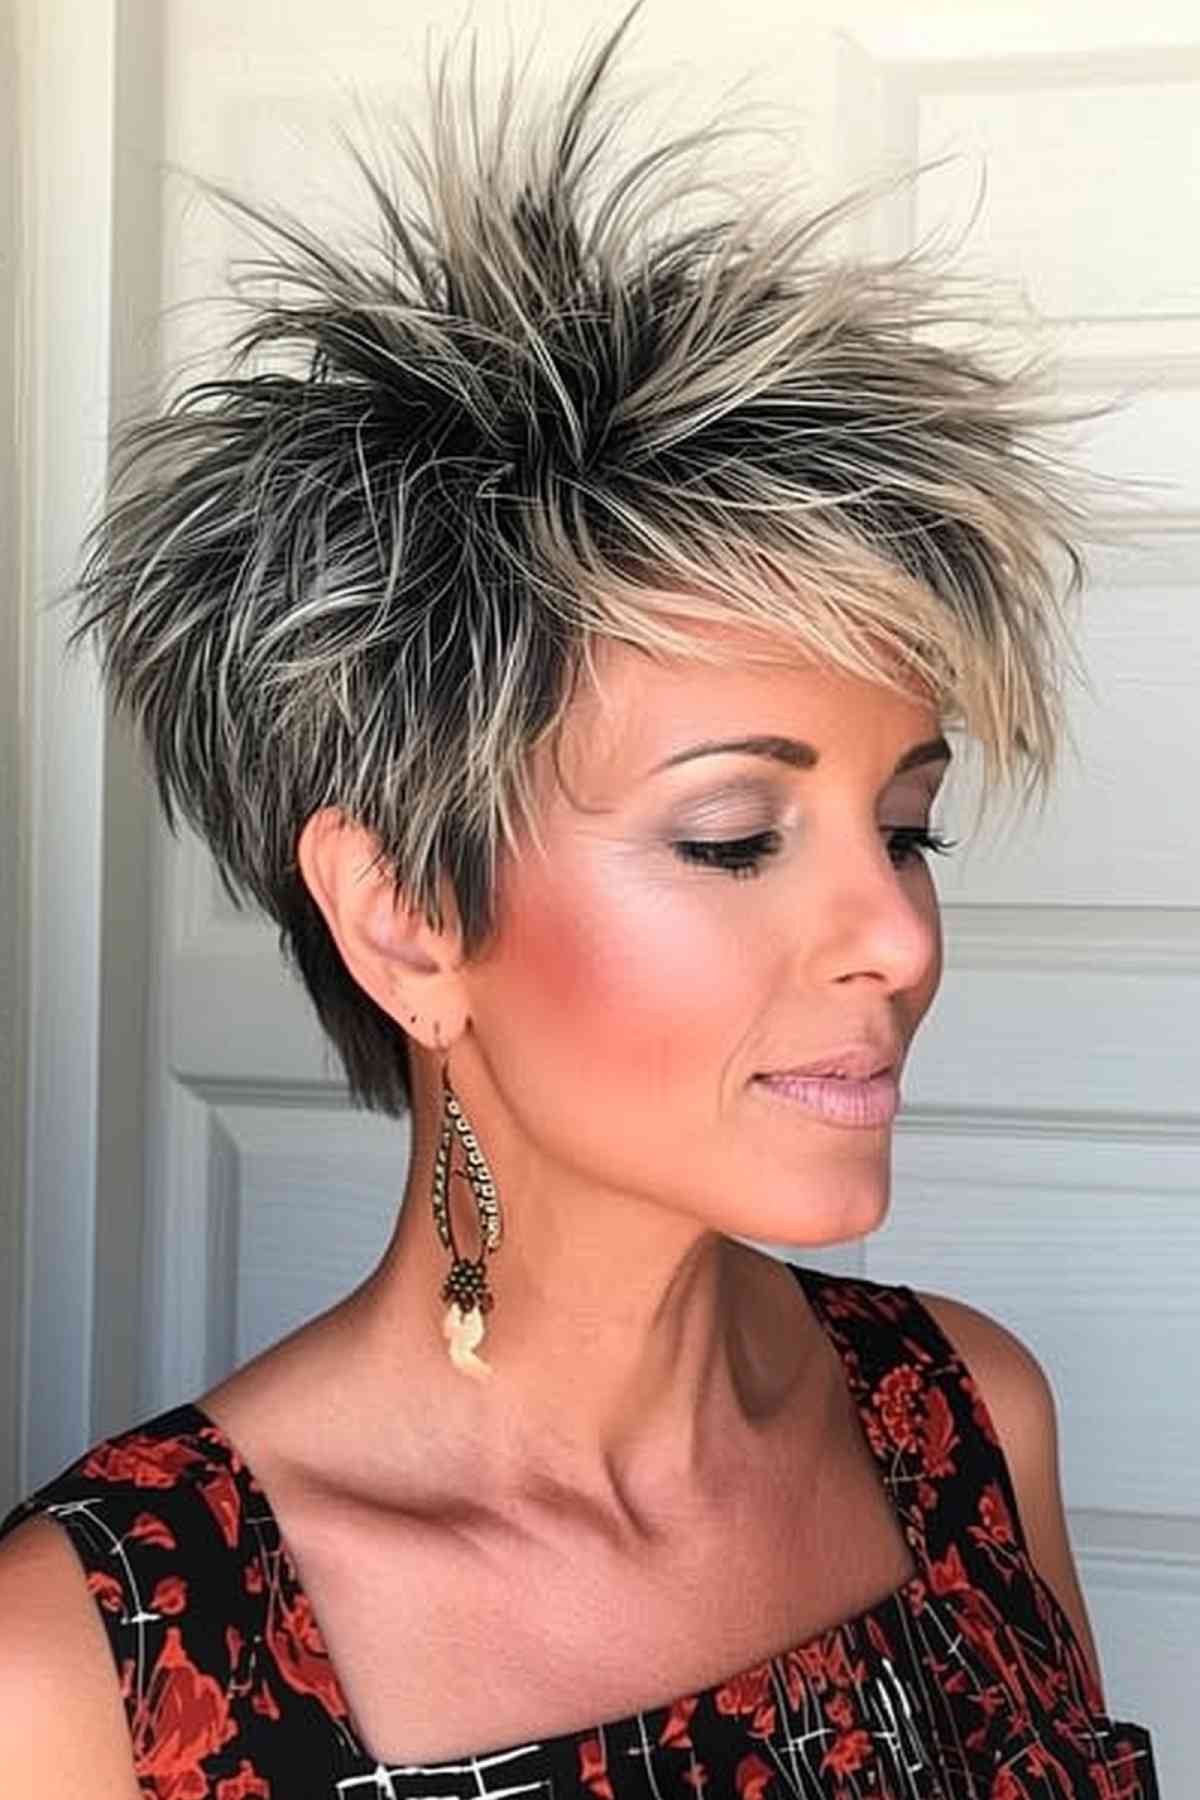 Short Spiky Mullet Hairstyle with Dark to Light Color Gradient